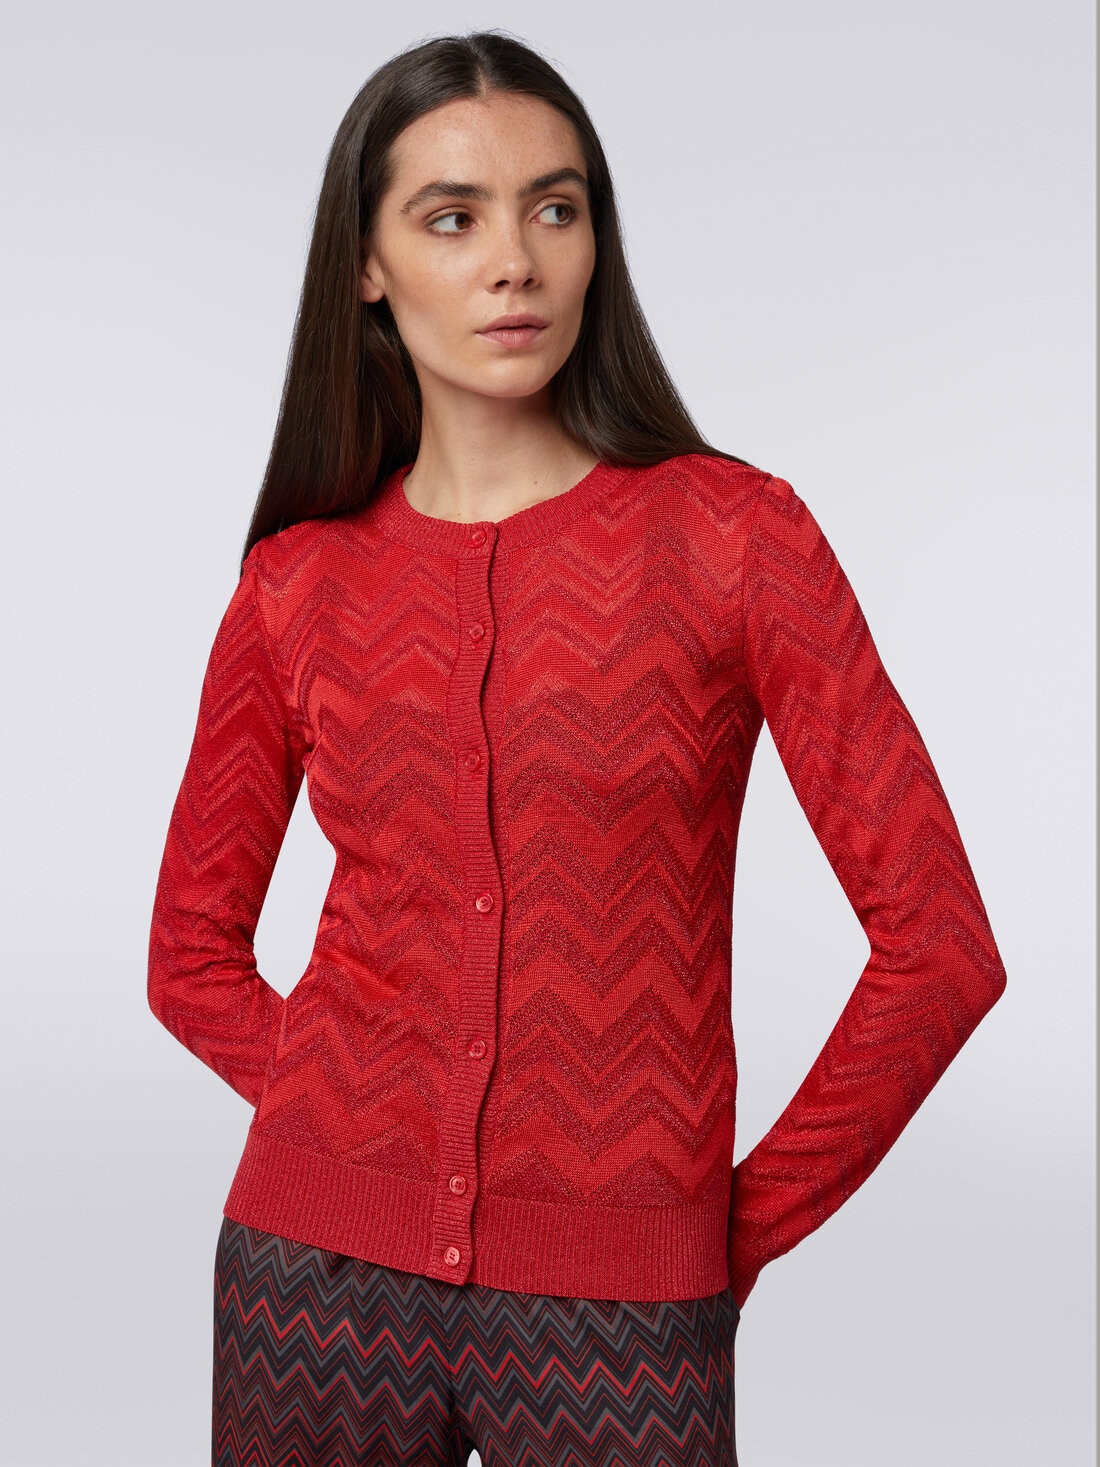 Cardigan in tonal zigzag knit with lurex, Red  - DS24SM0SBK034J81756 - 4